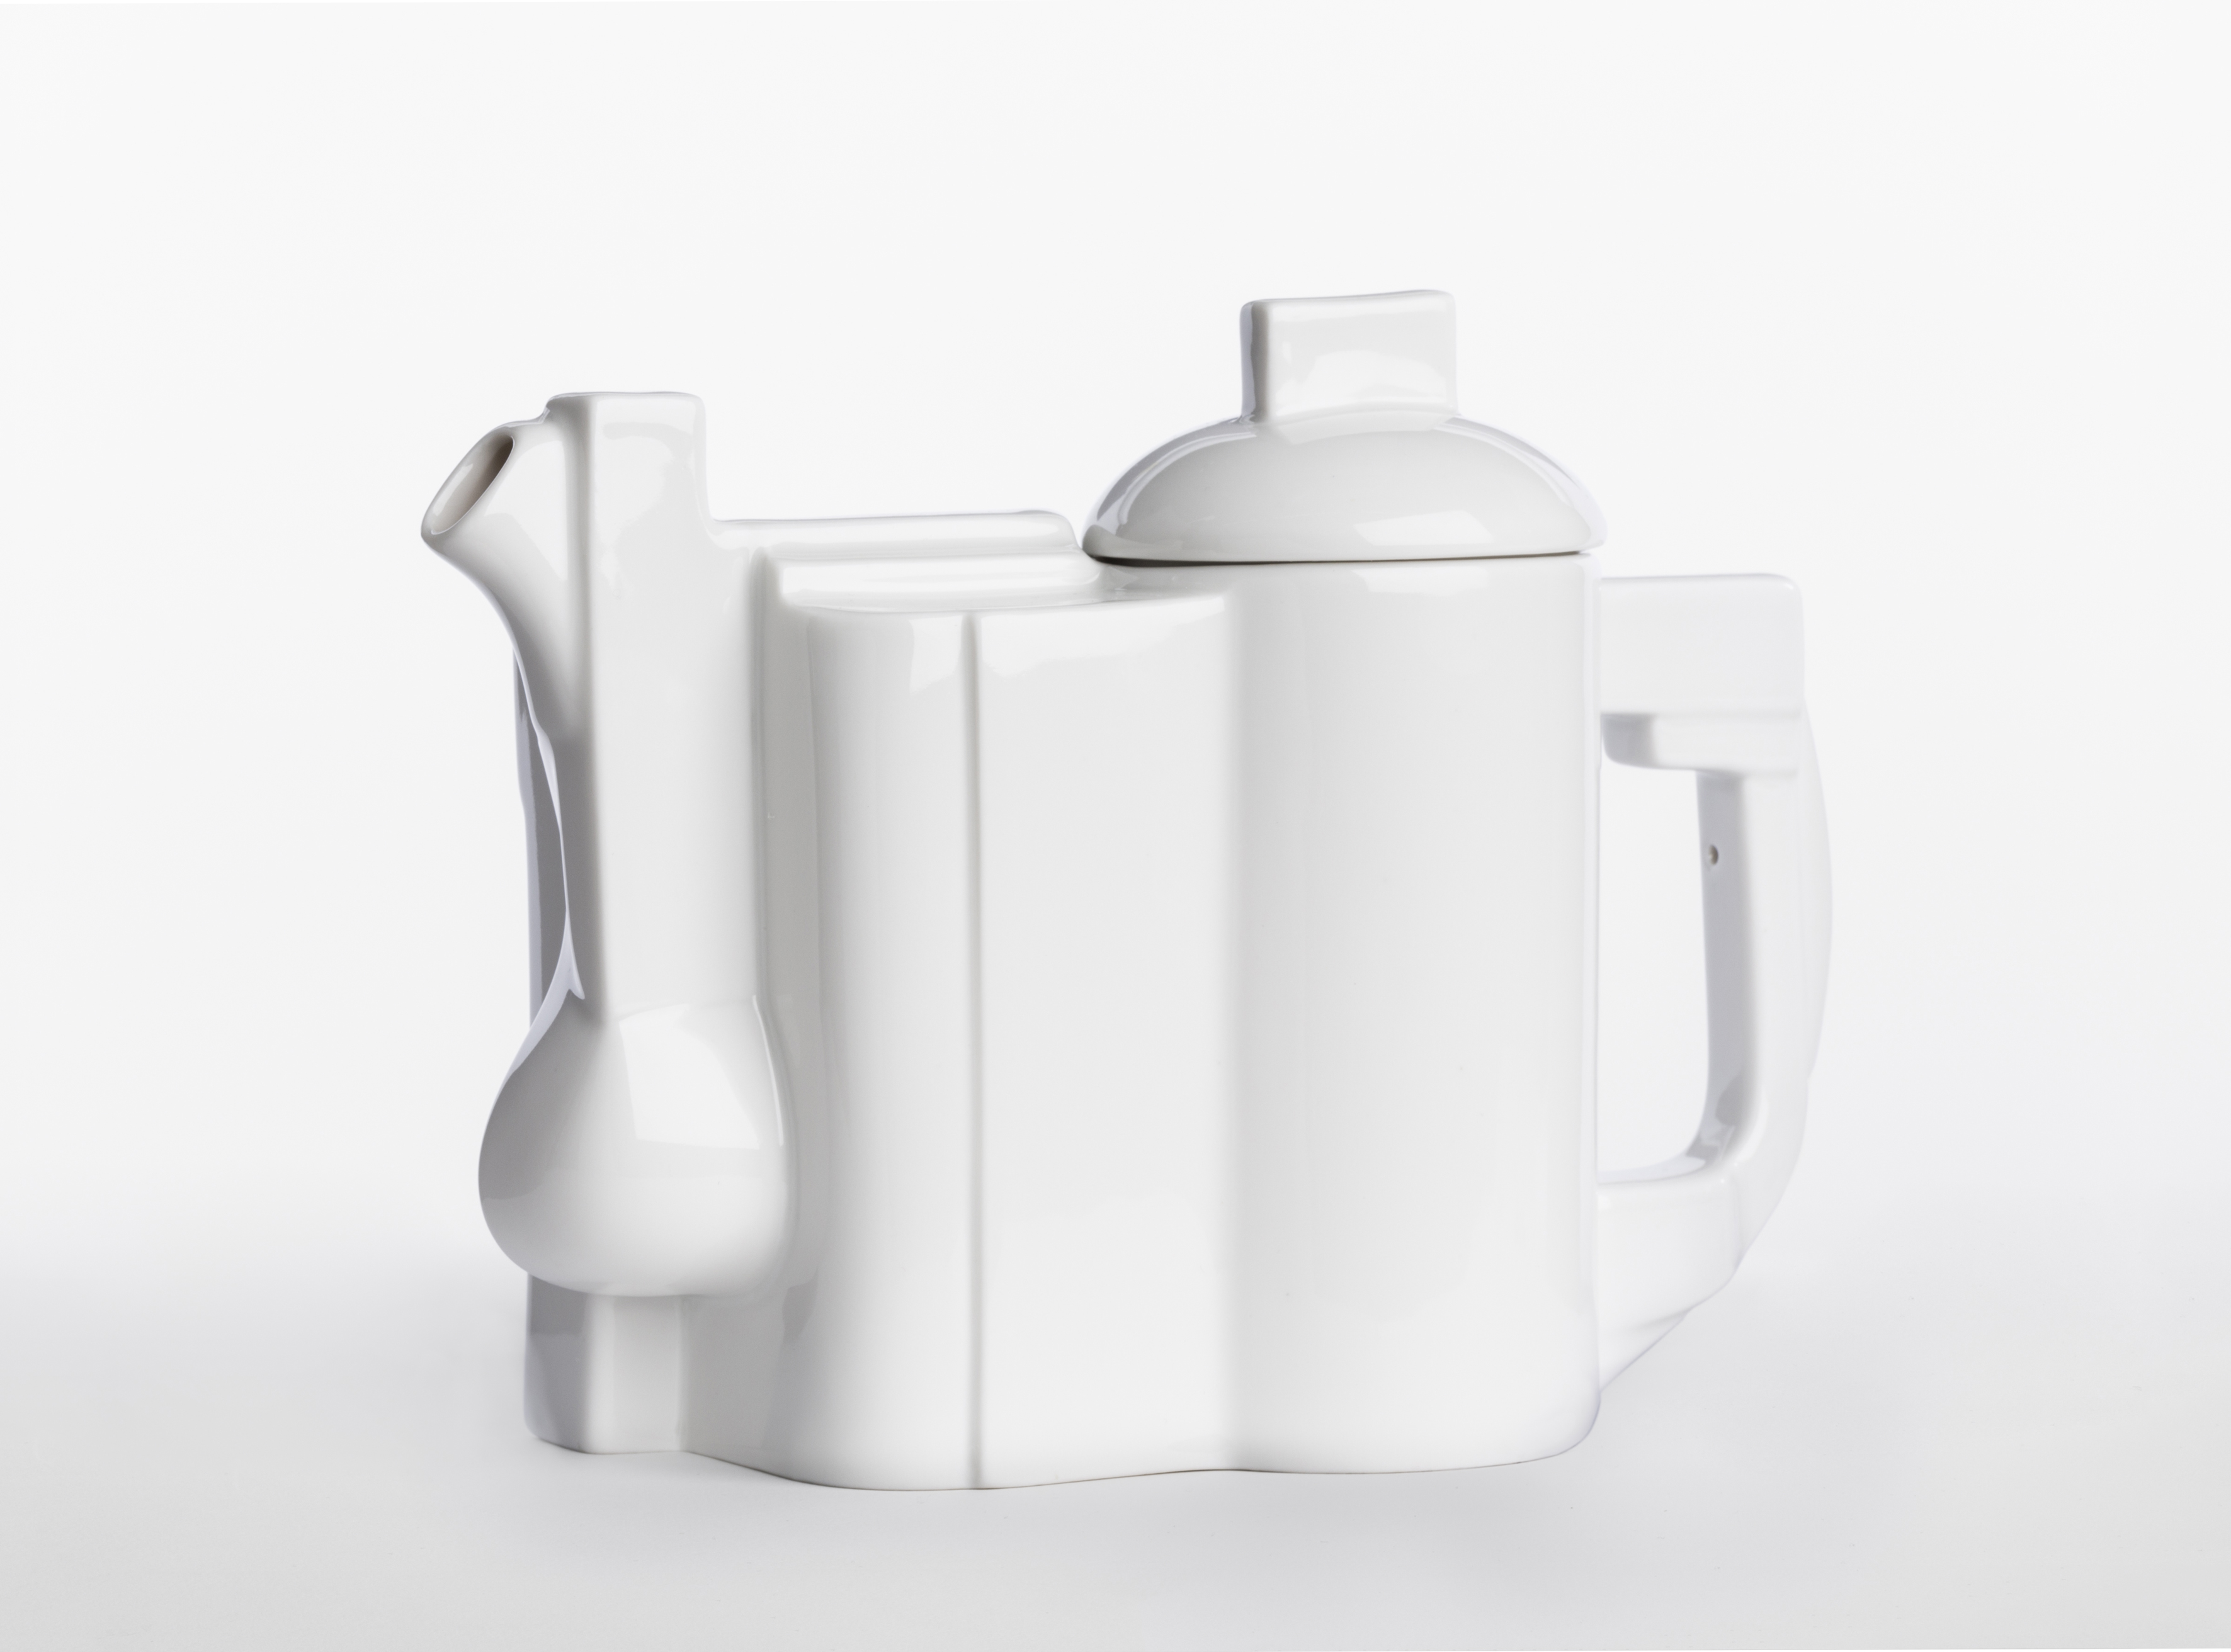 Suprematist Teapot (1923) by Kazimir Malewich. From the collection of Edmund de Waal. Photo by Ian Skelton